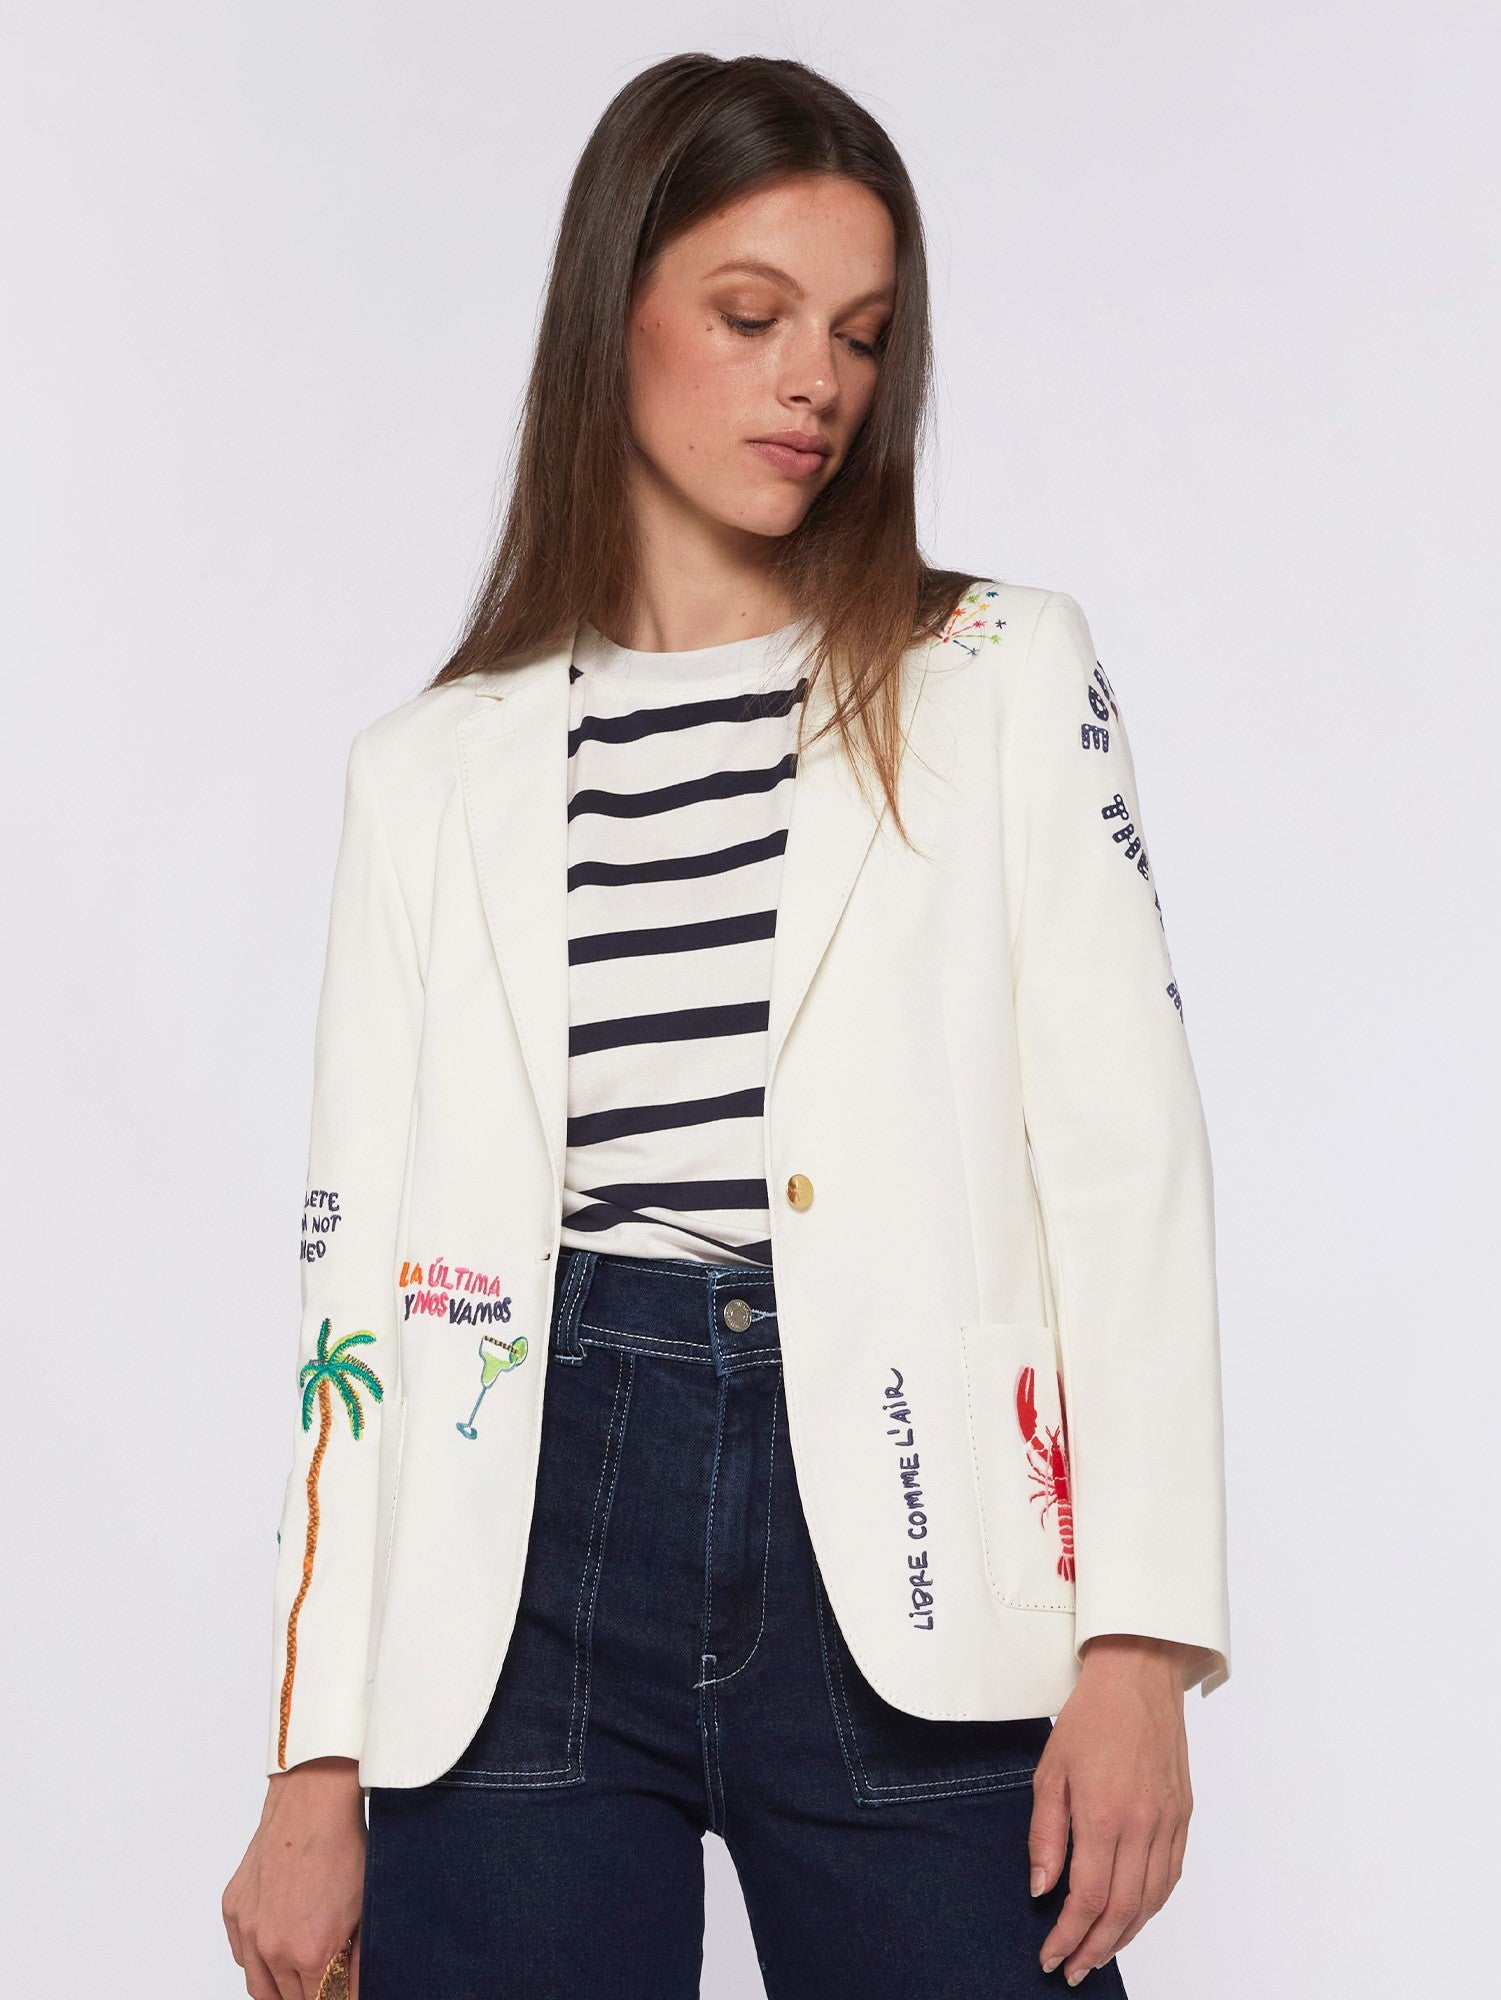 Harlow Jacket in White Knit with Embroidery